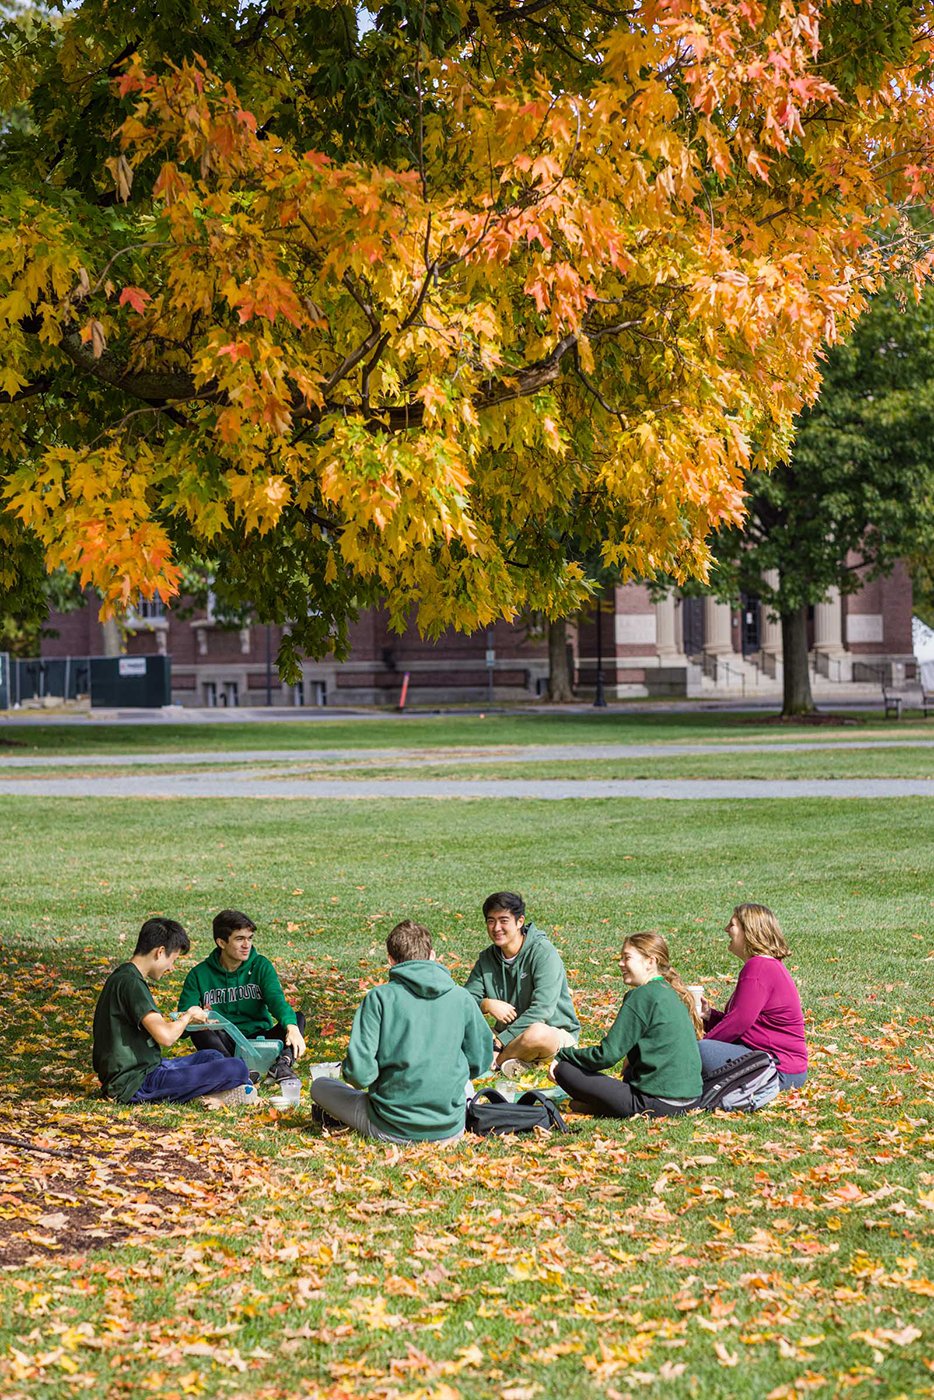 Dartmouth College students under a sugar maple tree shot by Oliver Parini for Yankee Magazine